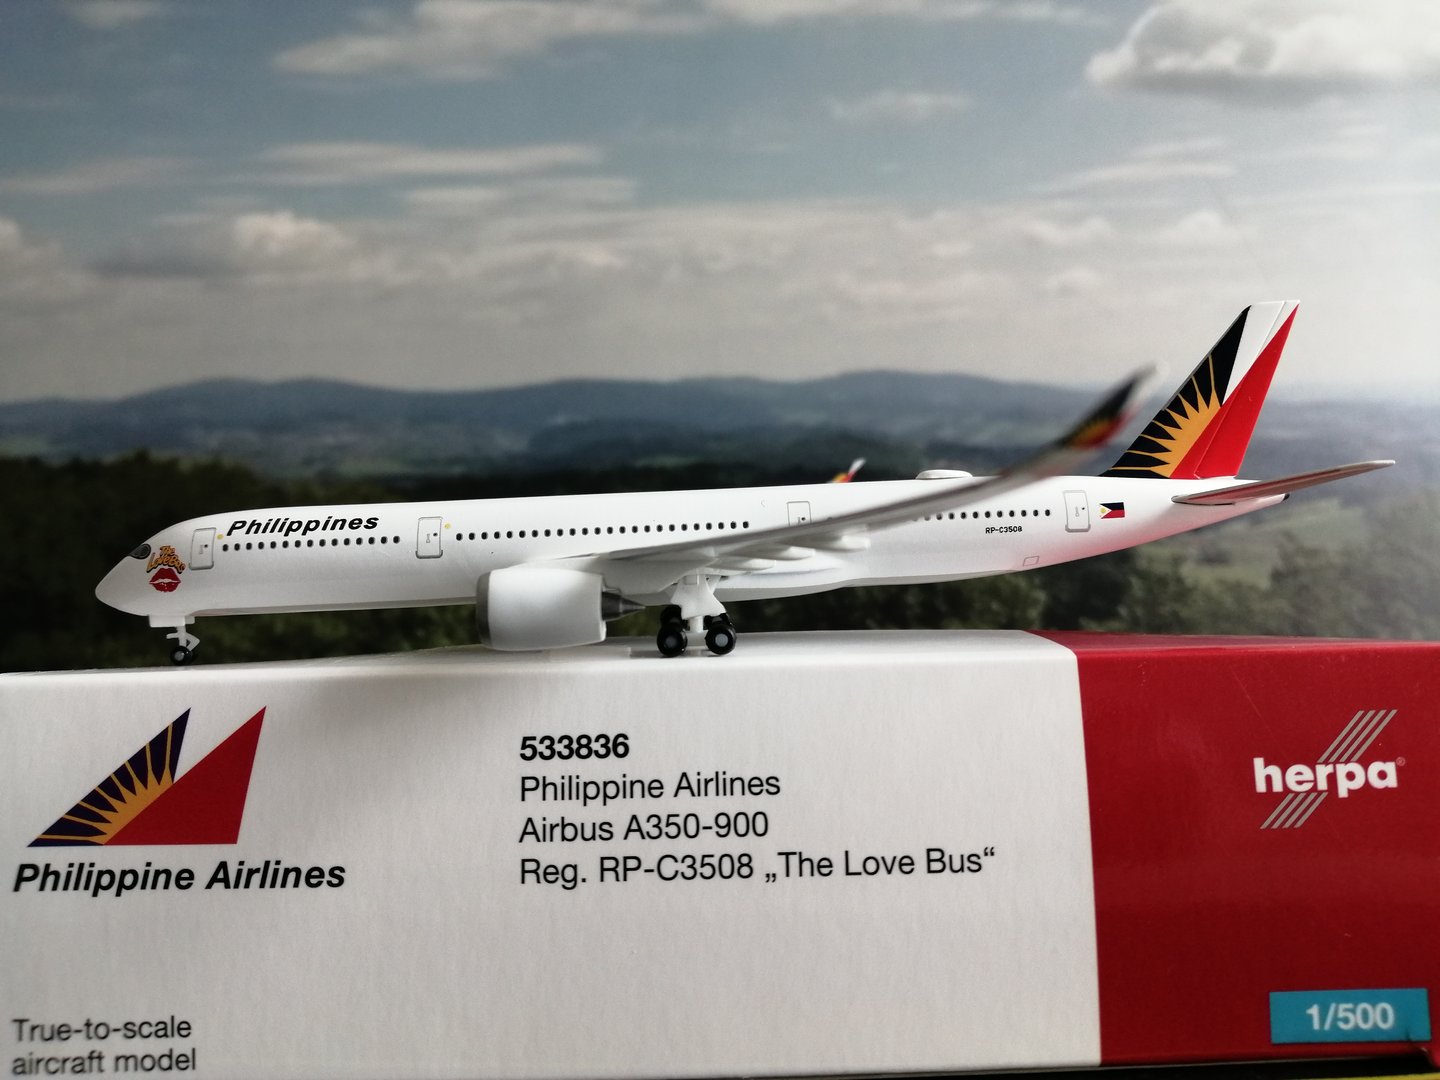 Herpa Wings 1:500 Philippine Airlines Airbus A350-900 "The Love Bus" 533836 